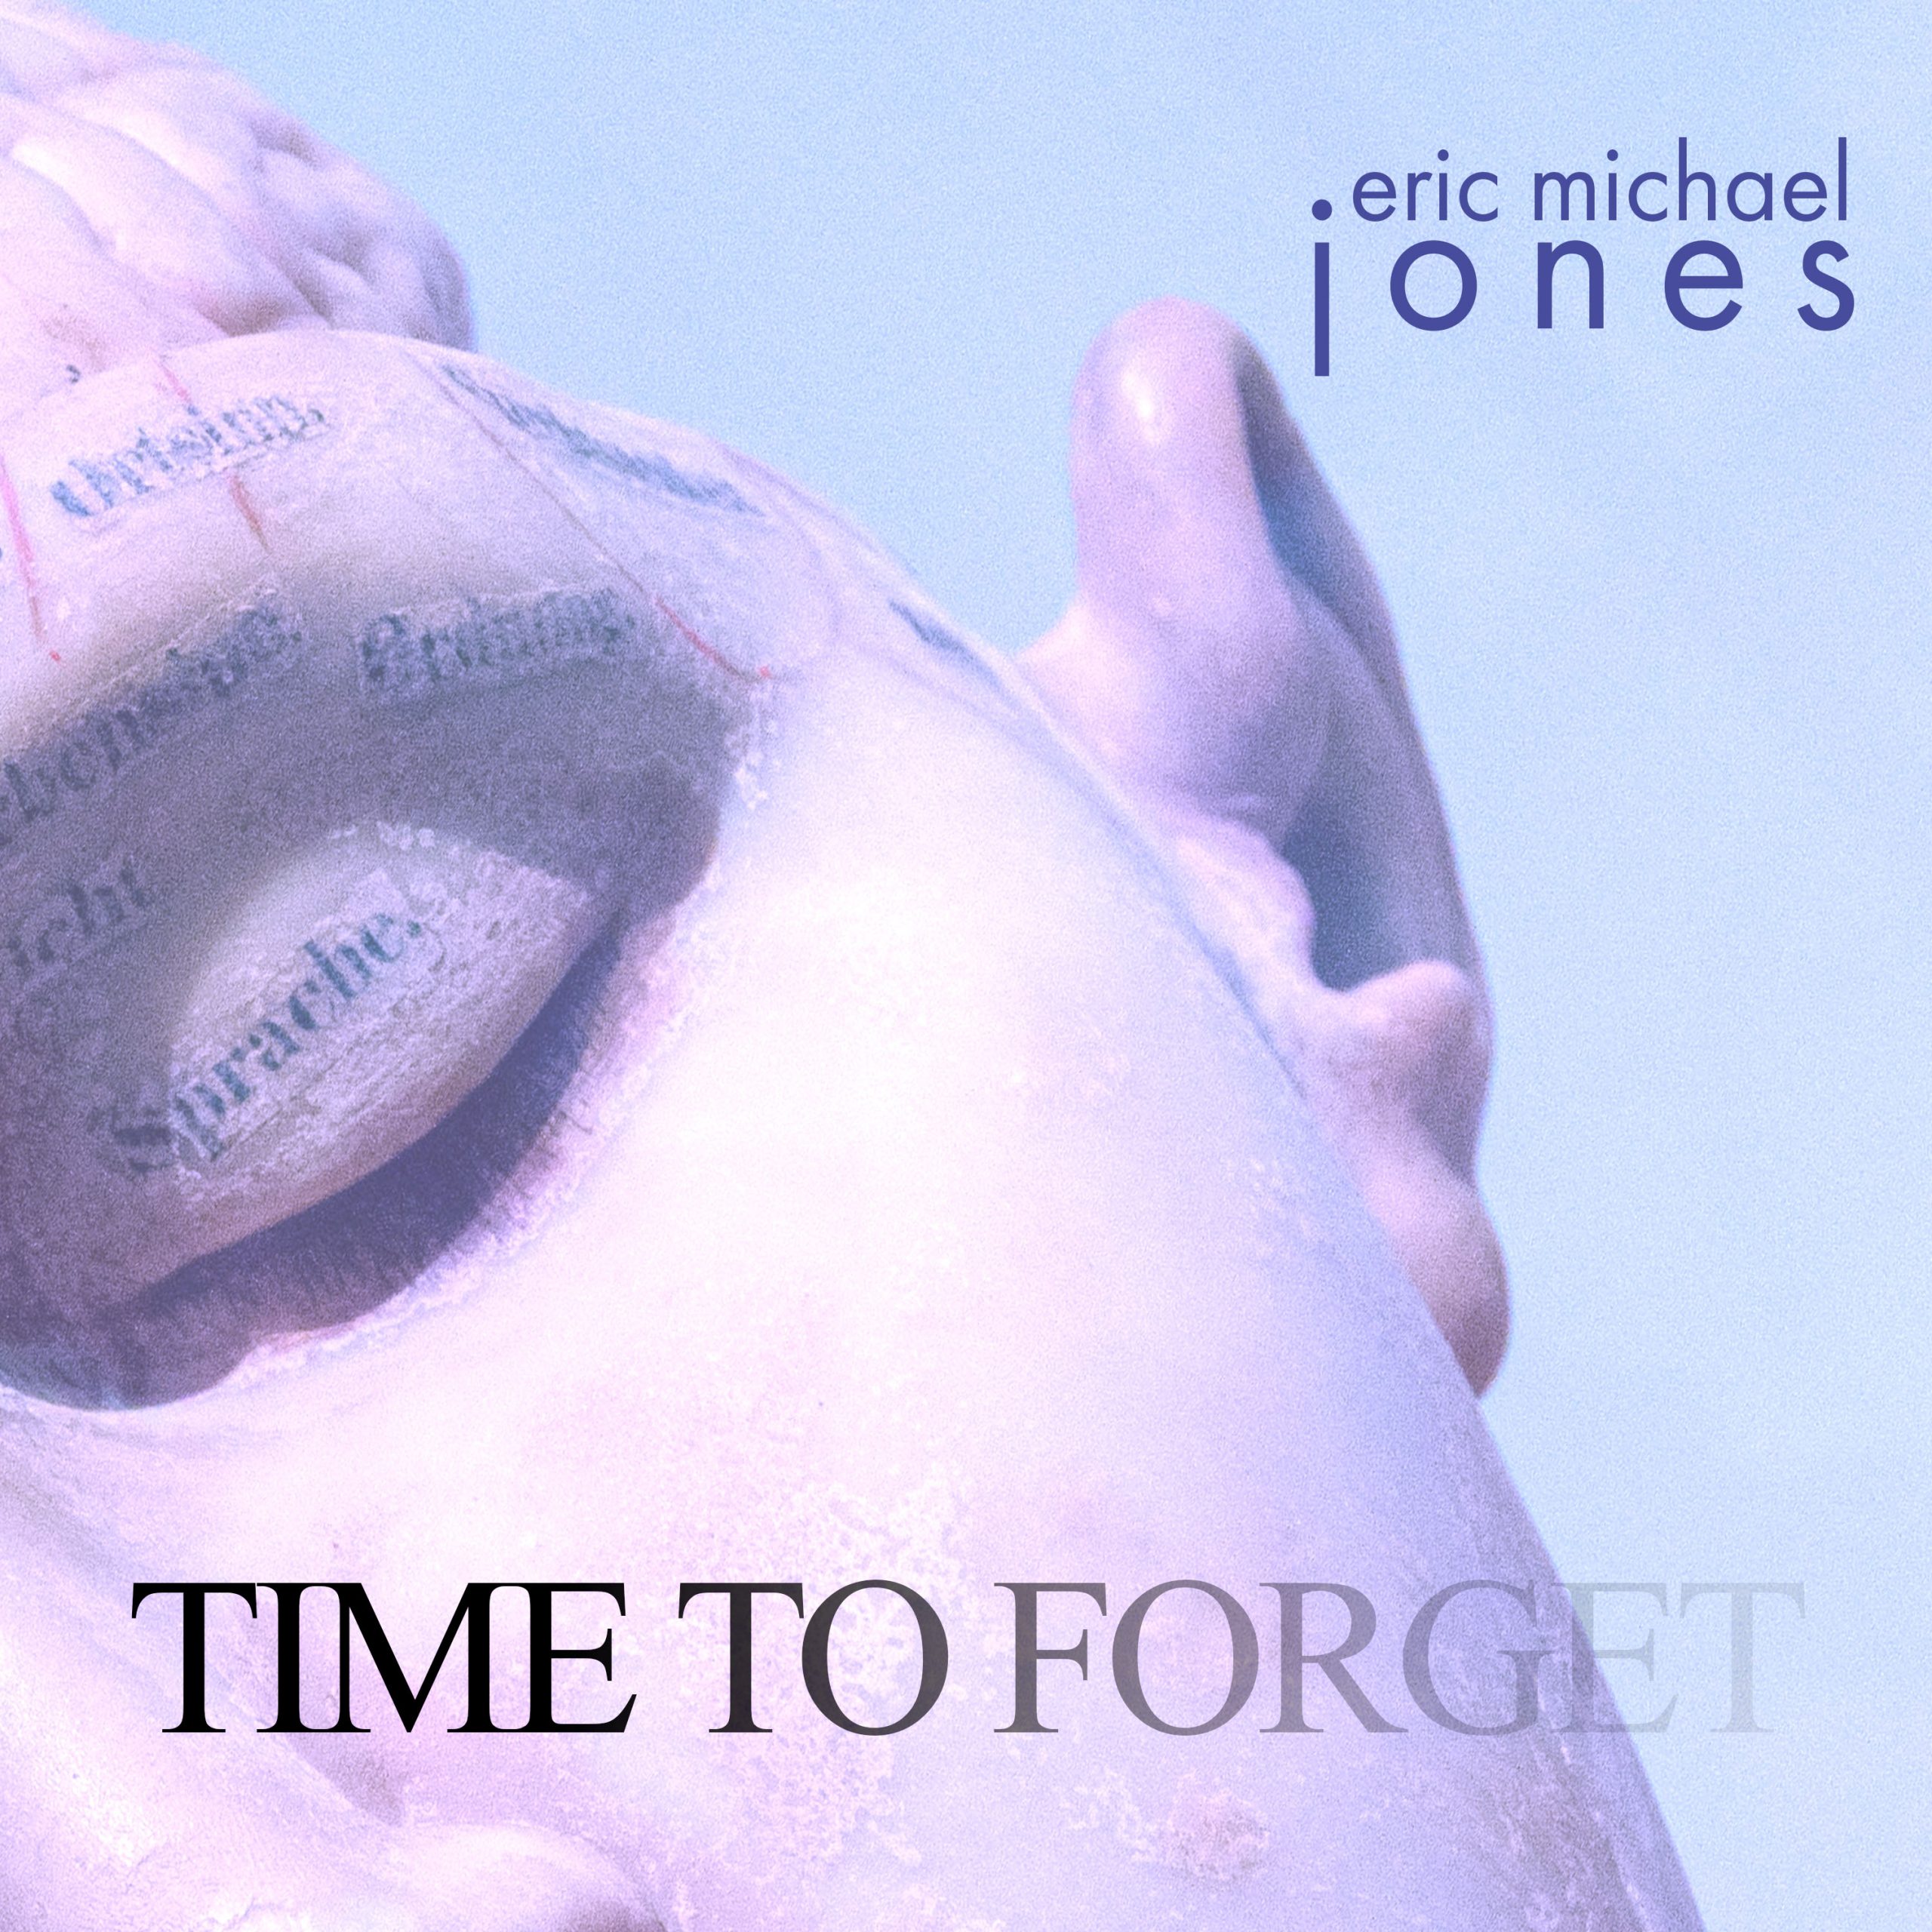 Cover art for Time To Forget showing a sculpture of a head with the brain exposed